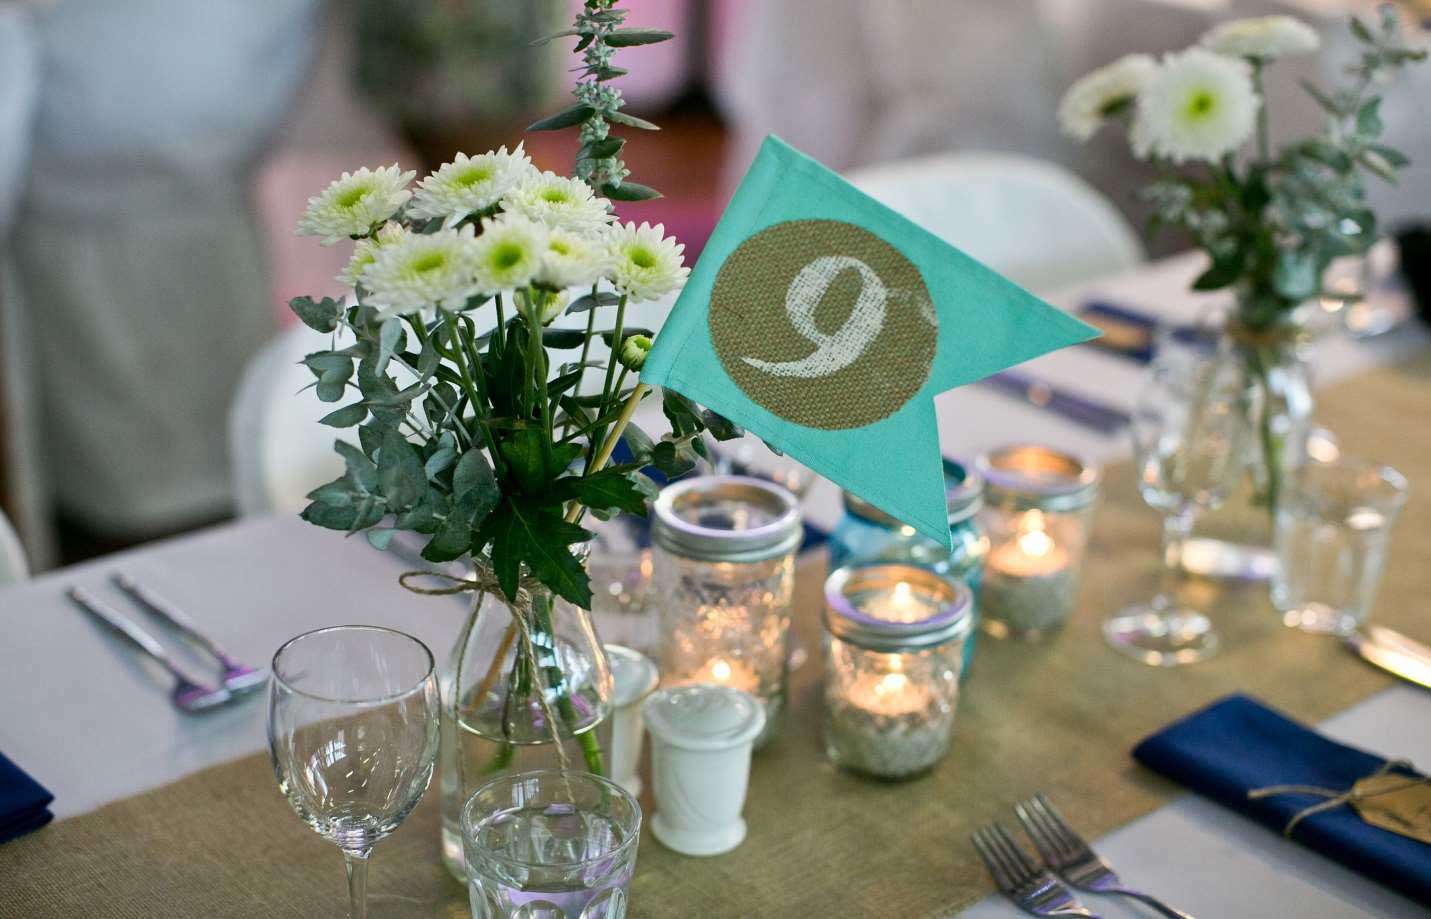 A close up image of a table decoration at a wedding